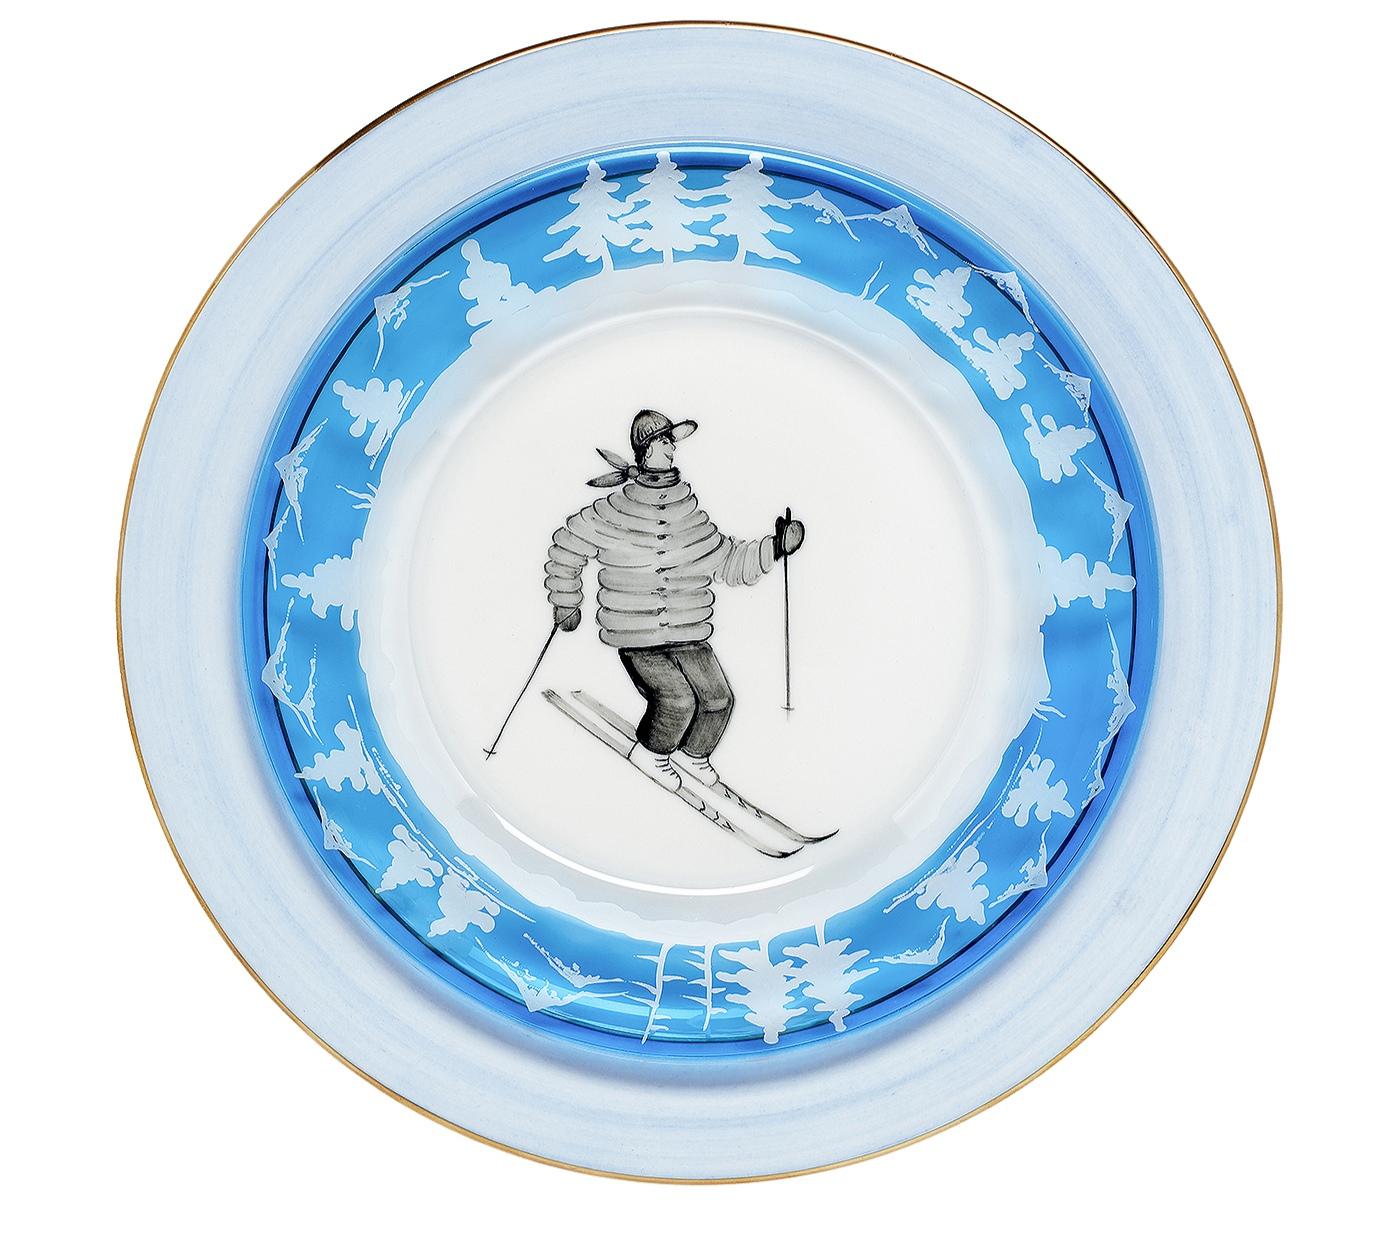 Set of six plates in blue crystal with a skier decor all around. The charming country decor is hand.-engraved and shows sladder, skier, ice skater with trees all around the plate. The glass plates can be ordered in different colors. All Sofina glass